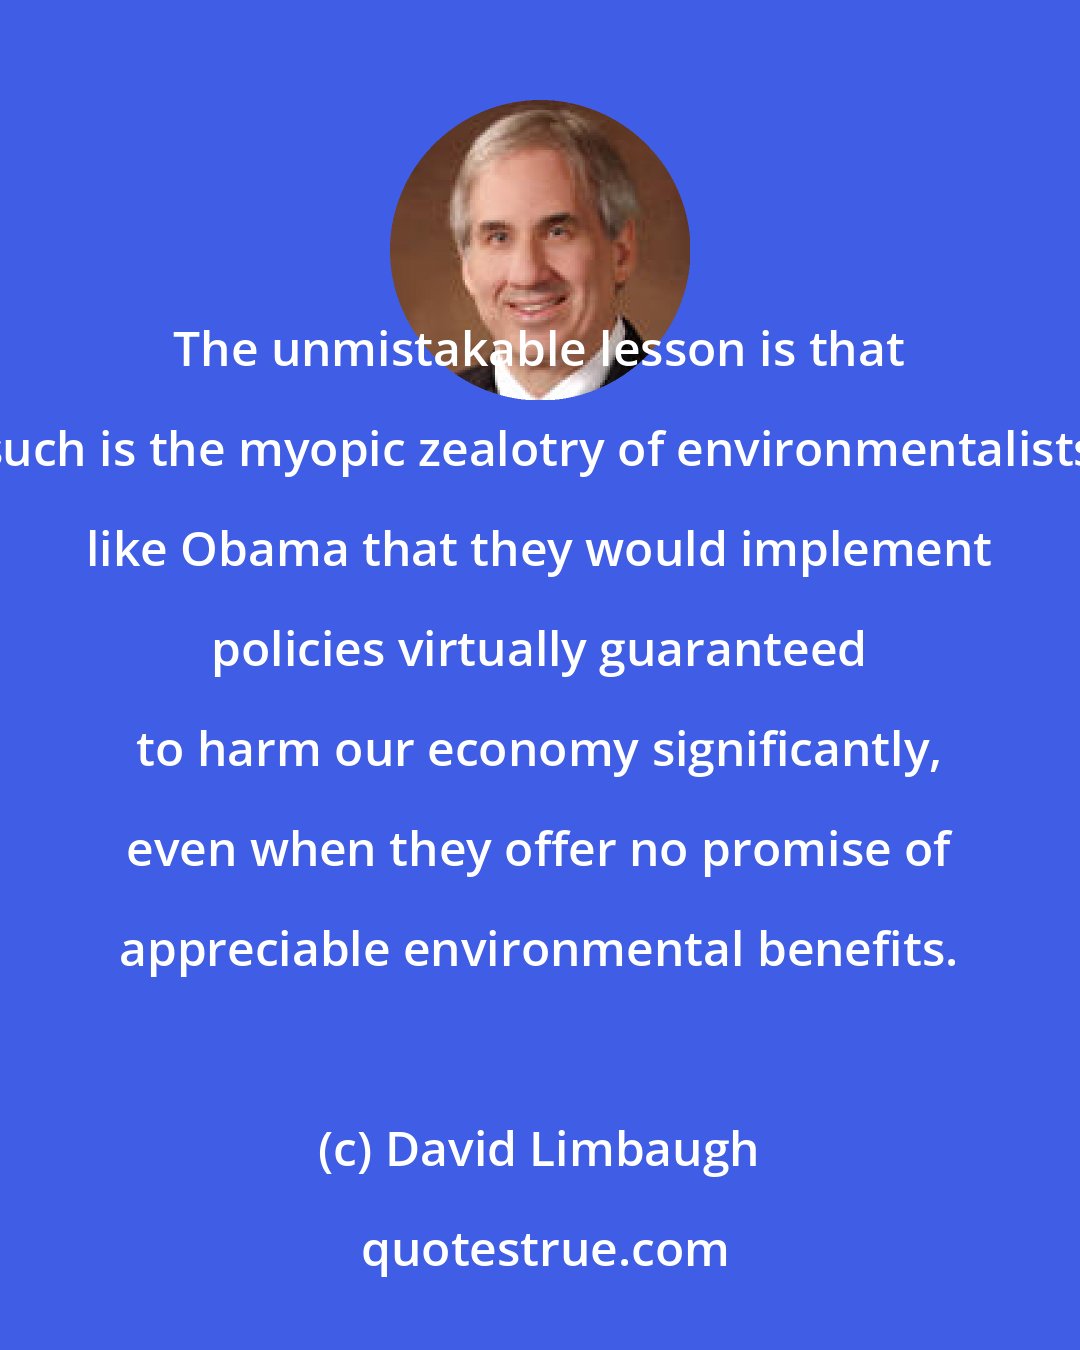 David Limbaugh: The unmistakable lesson is that such is the myopic zealotry of environmentalists like Obama that they would implement policies virtually guaranteed to harm our economy significantly, even when they offer no promise of appreciable environmental benefits.